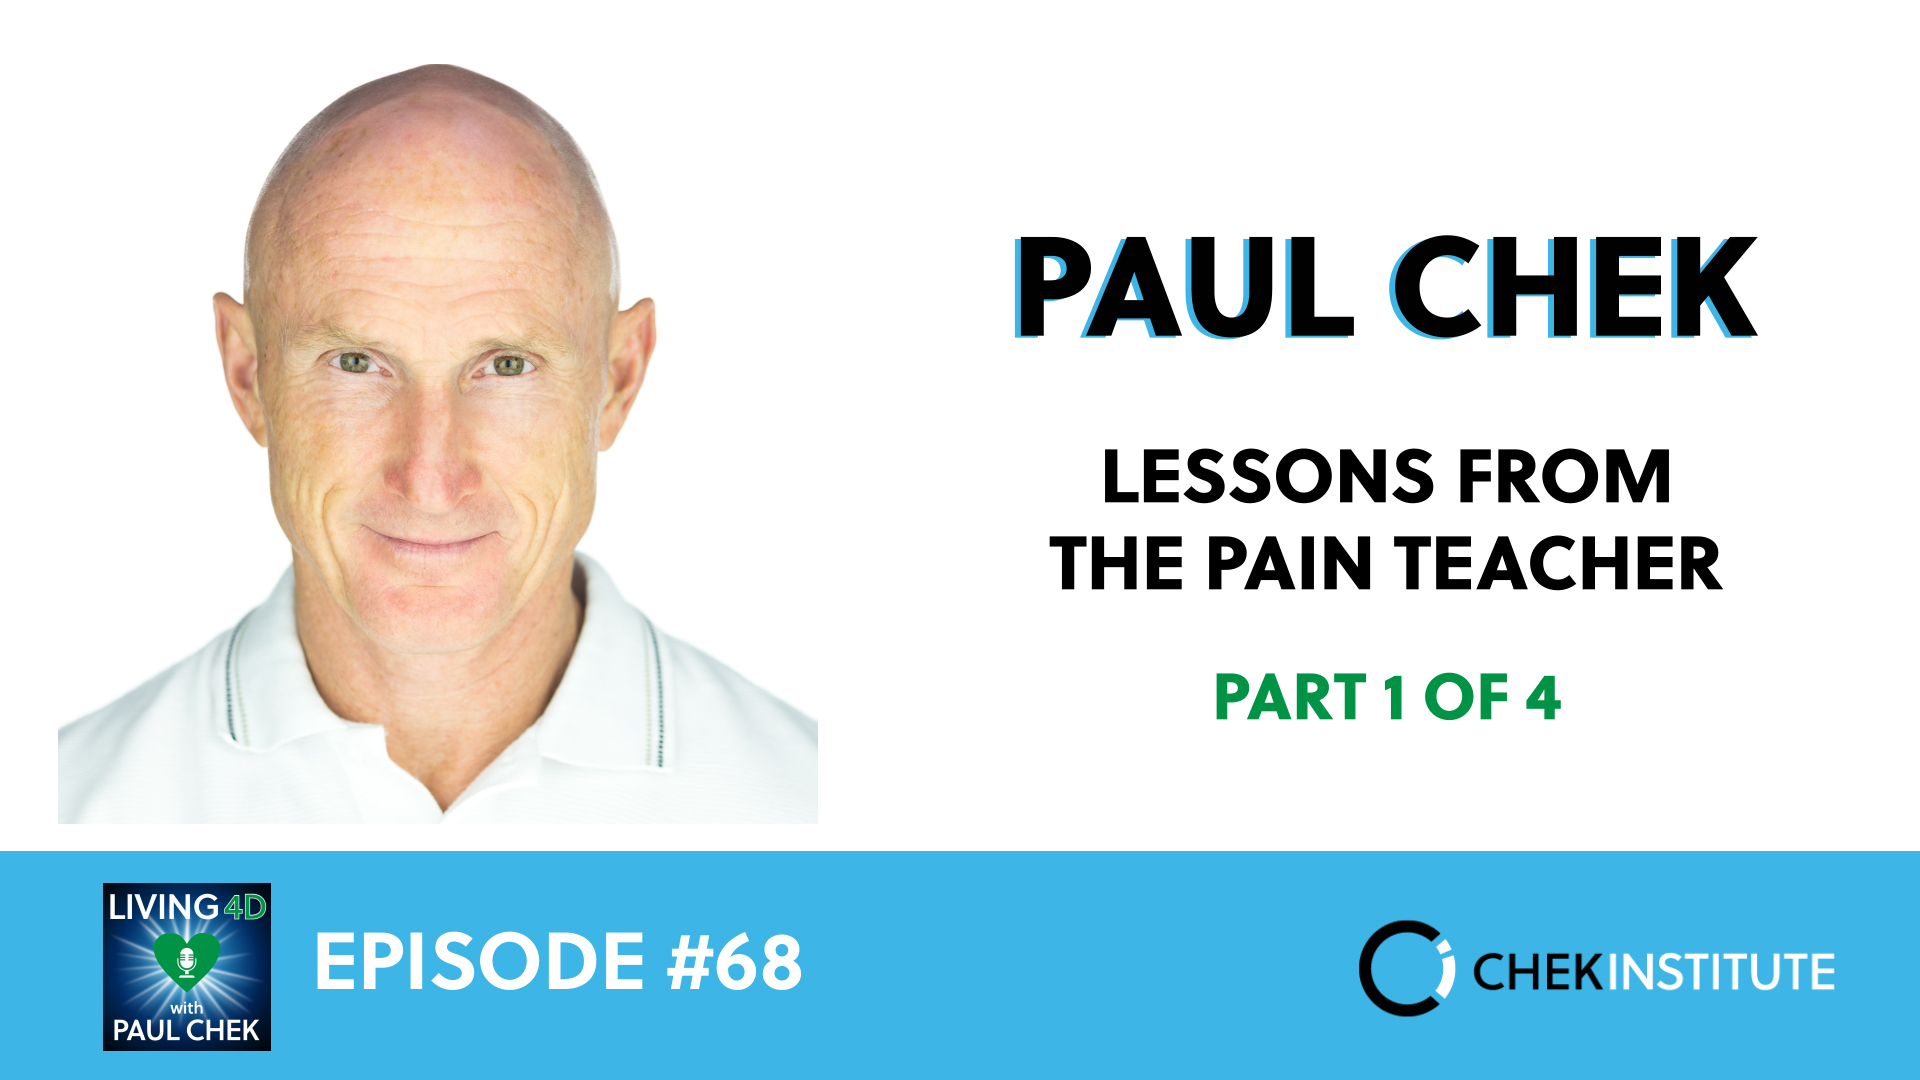 EP 68 - Paul Chek: Lessons from the Pain Teacher